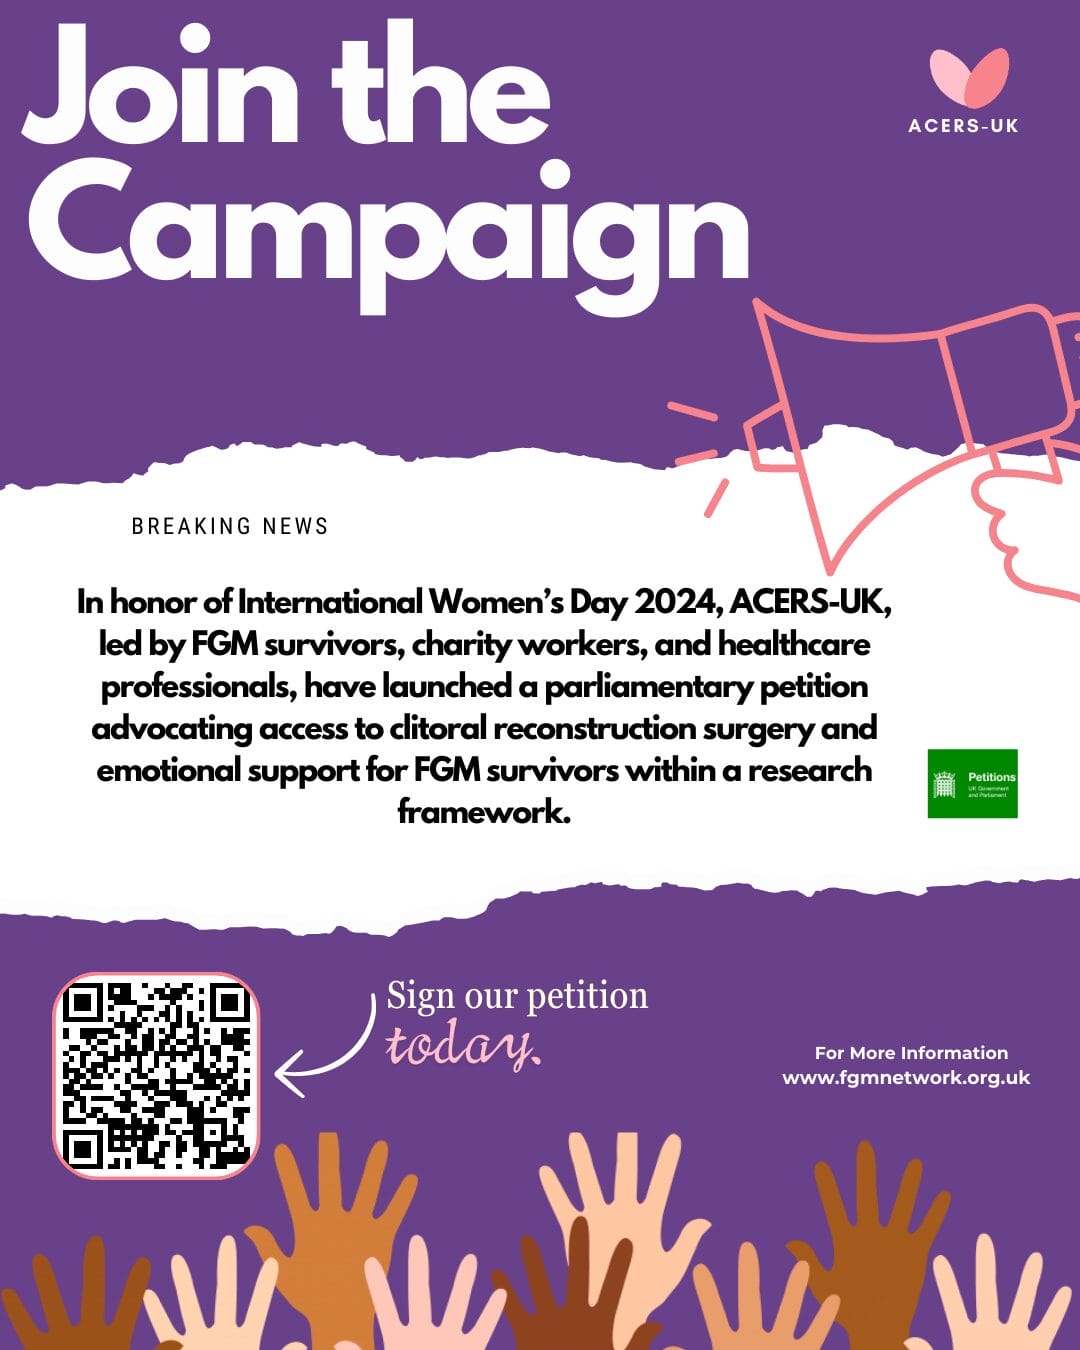 SIgn our petition poster 2